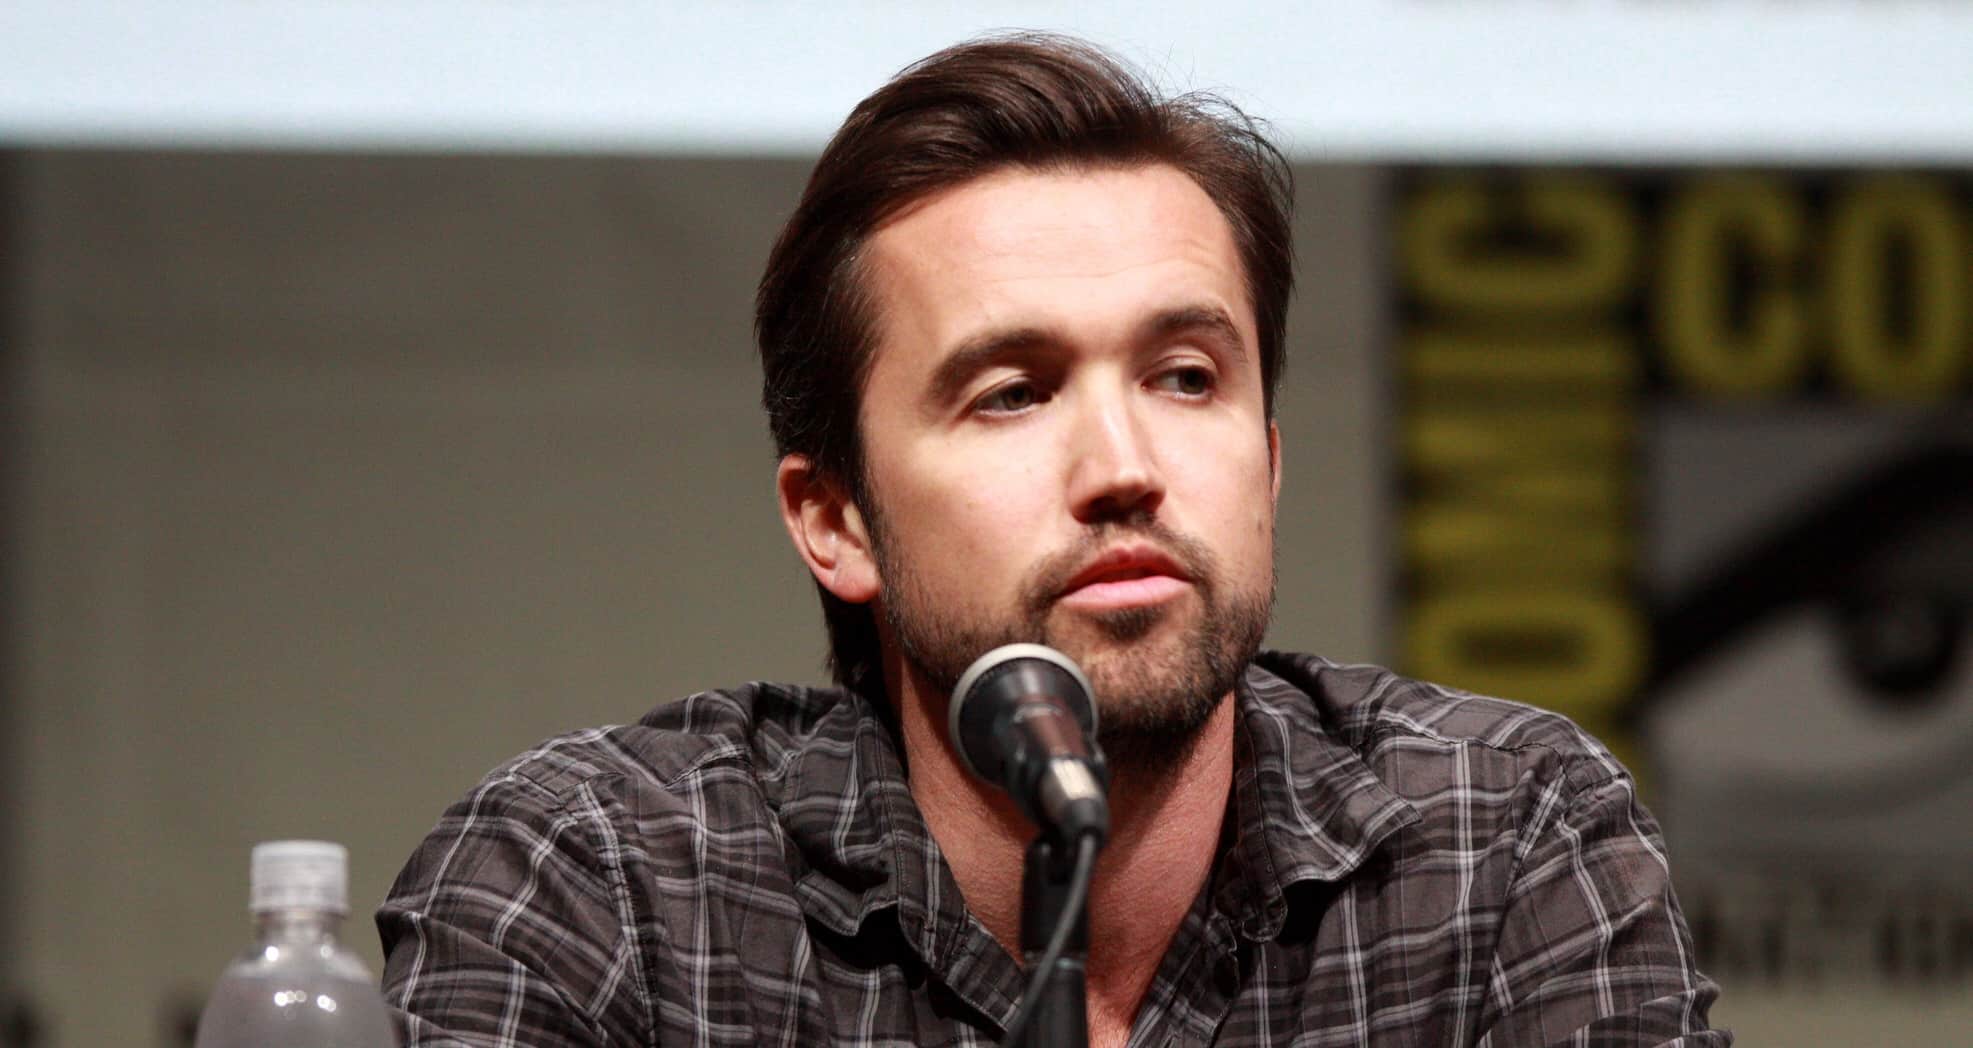 Rob McElhenney, one of the writers of It's Always Sunny in Philadelphia, has teamed up with an old partner on a new Apple TV show.